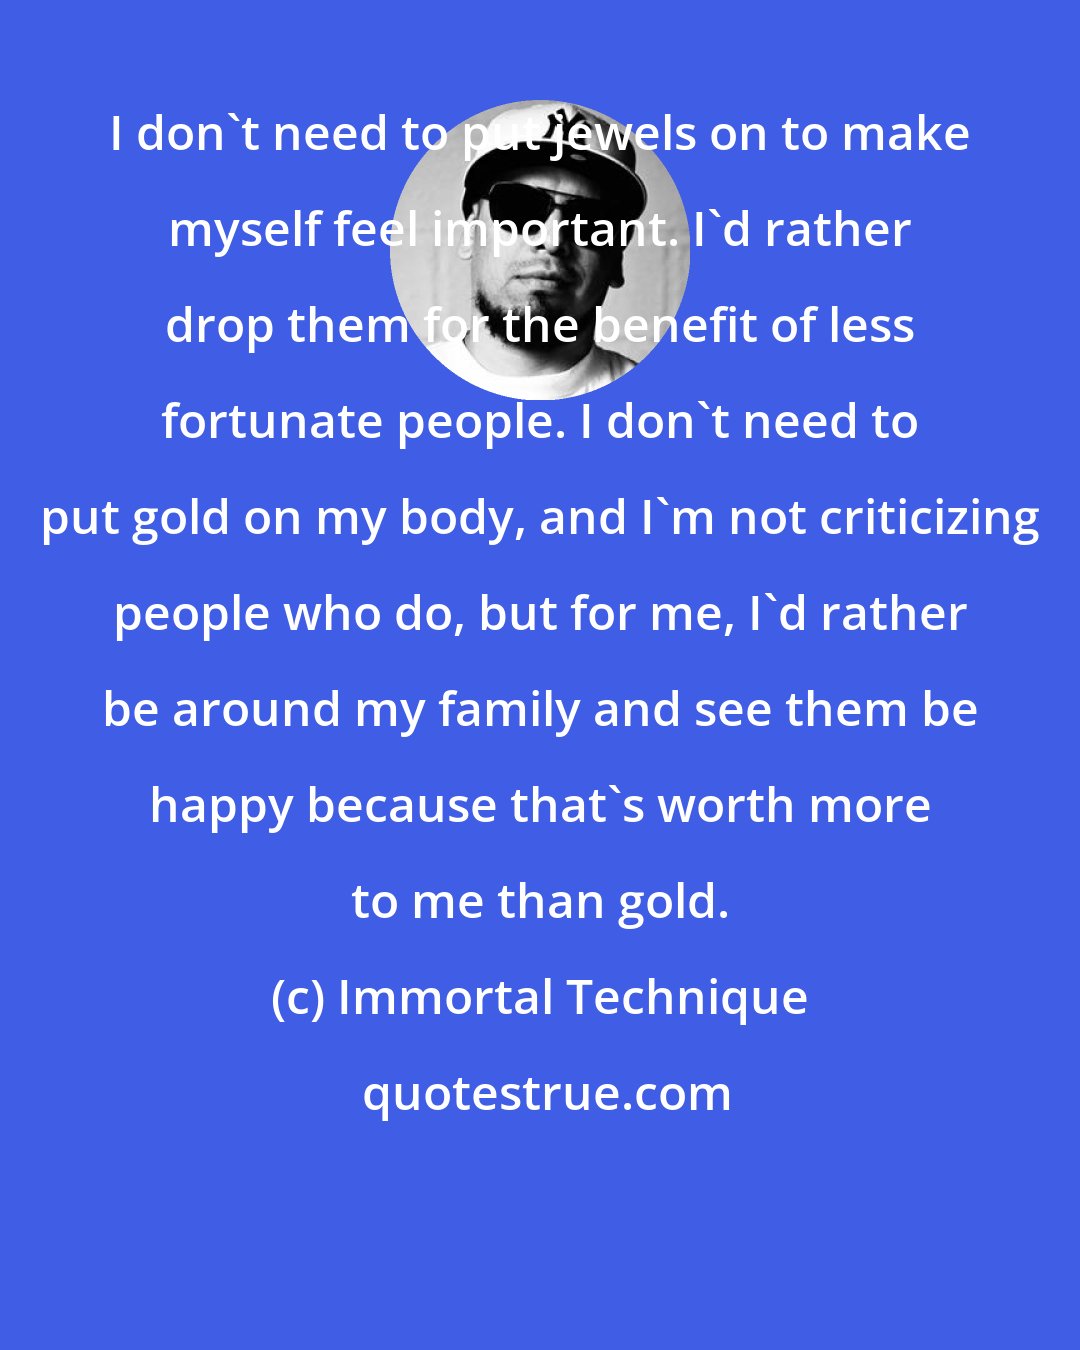 Immortal Technique: I don't need to put jewels on to make myself feel important. I'd rather drop them for the benefit of less fortunate people. I don't need to put gold on my body, and I'm not criticizing people who do, but for me, I'd rather be around my family and see them be happy because that's worth more to me than gold.